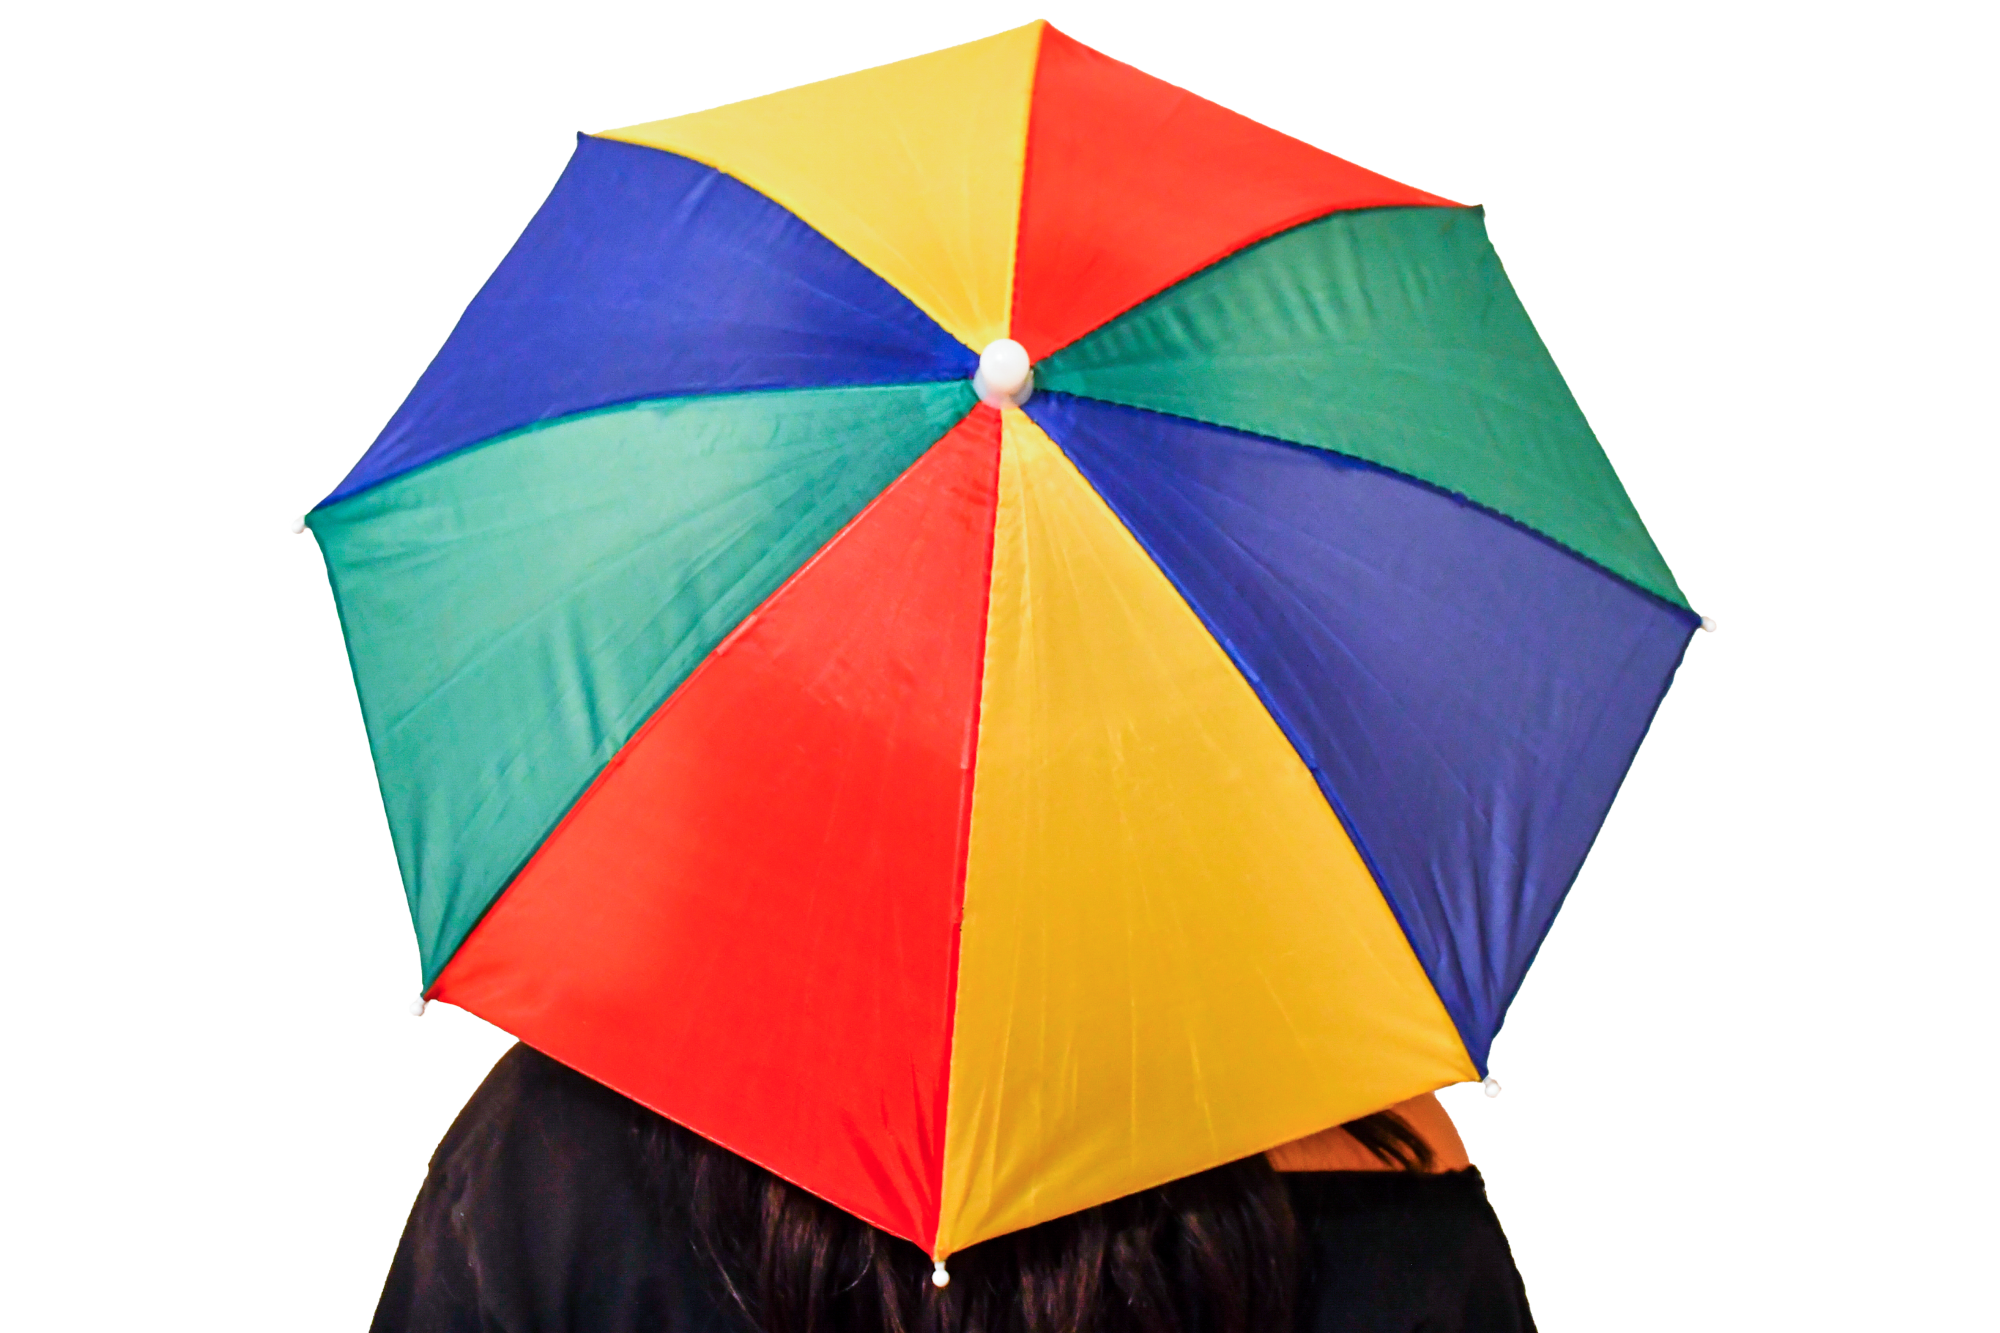 A multicolor umbrella hat obscures the person wearing it